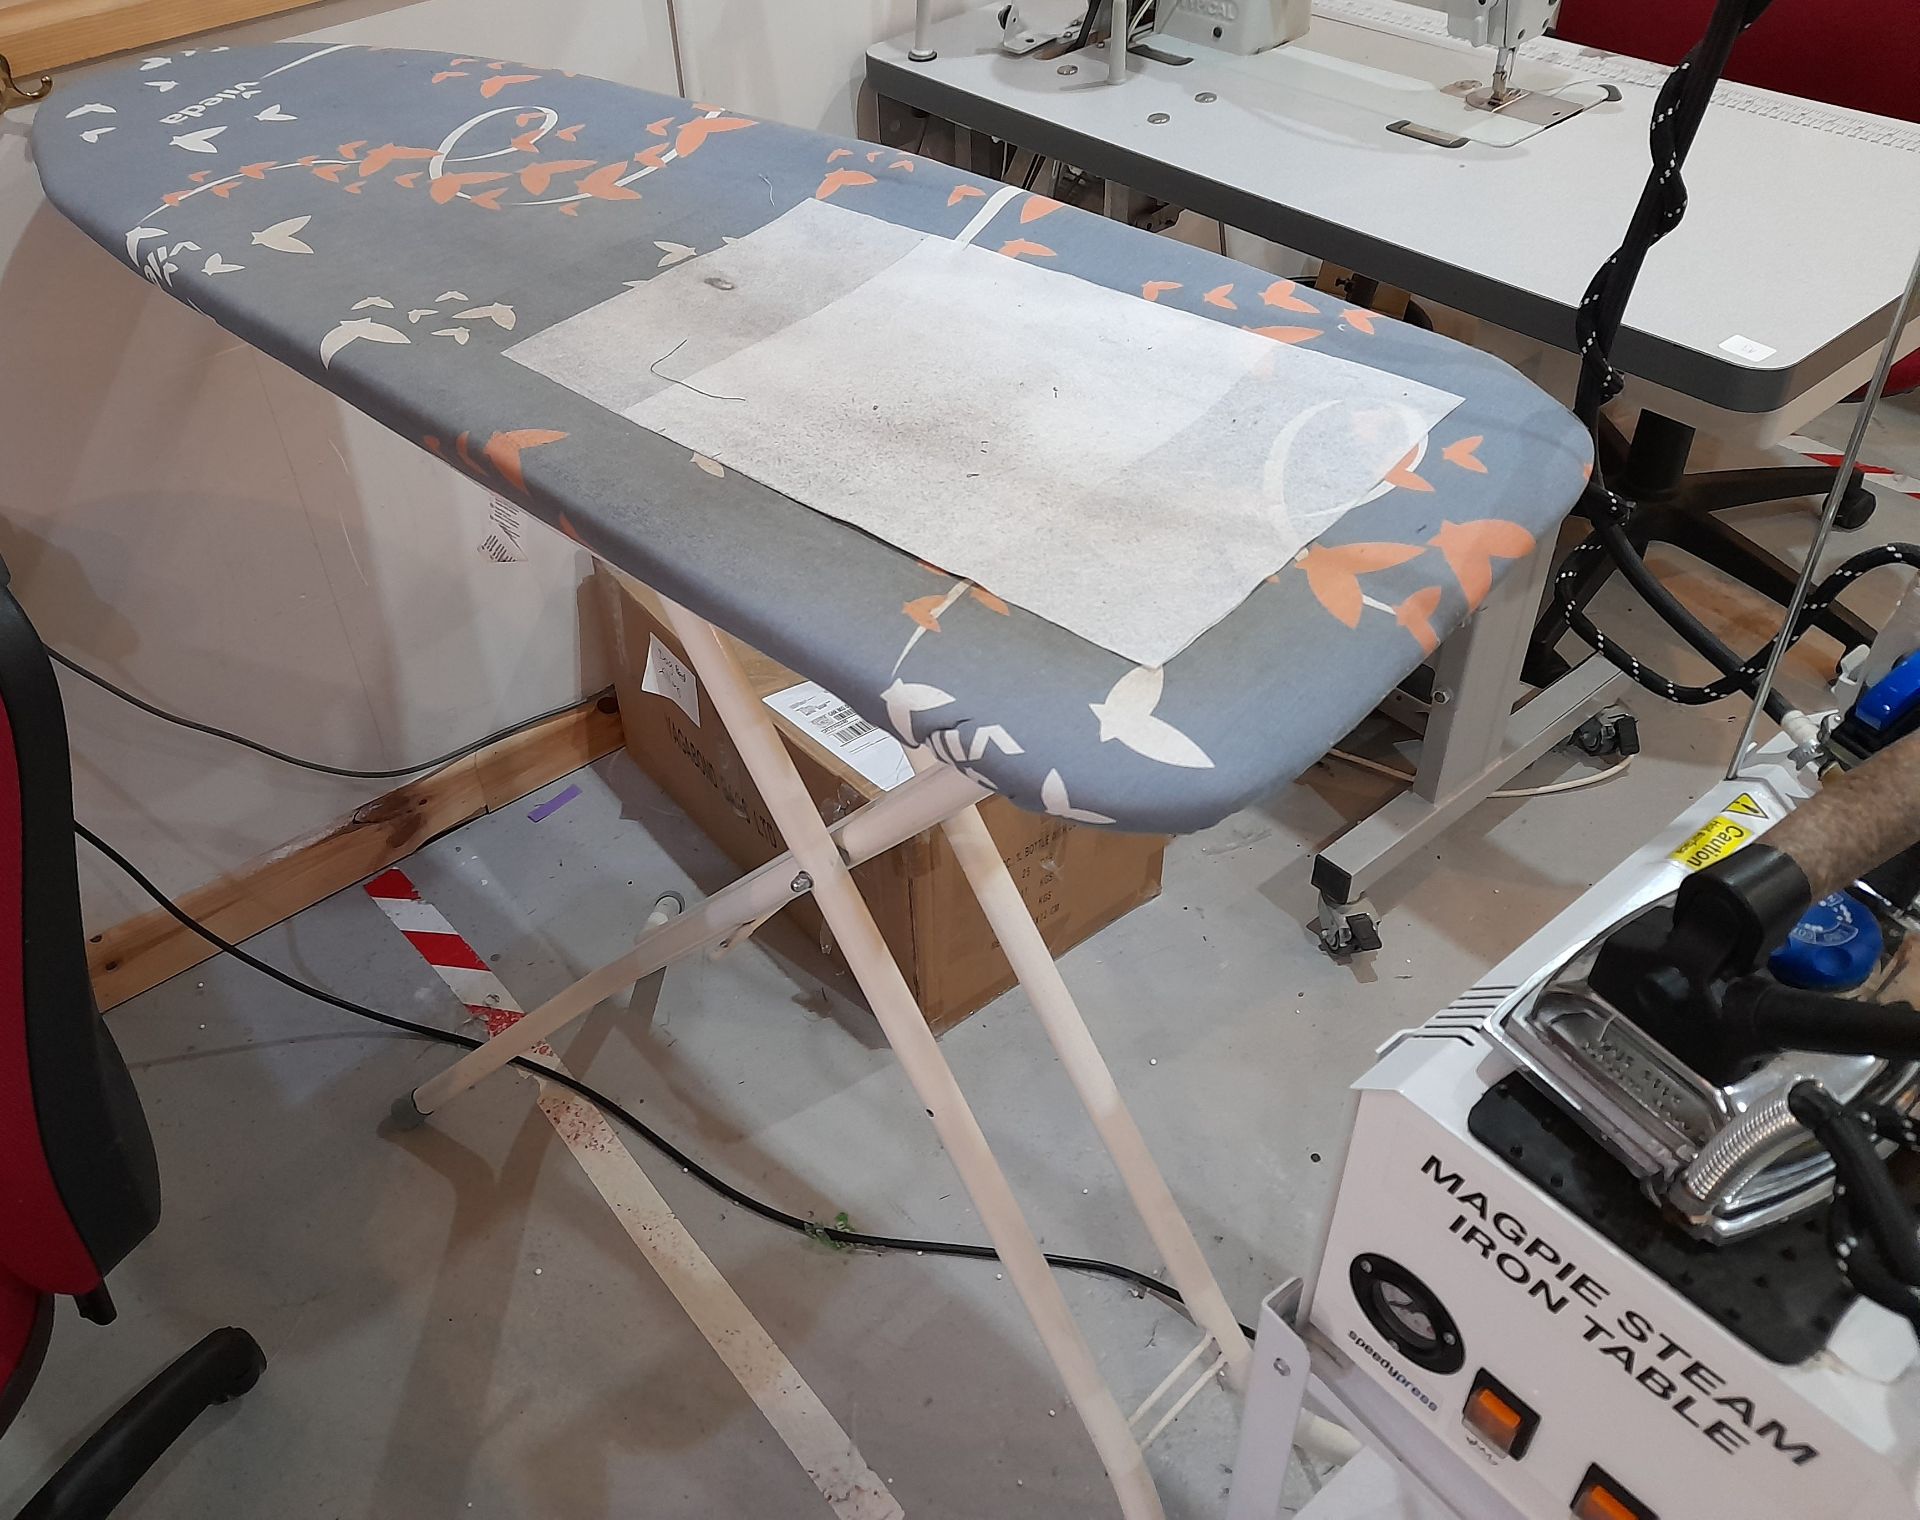 Speedypress C9 magic steam iron table, iron and boiler system (4.9L Capacity, Year 2019) - Image 6 of 6